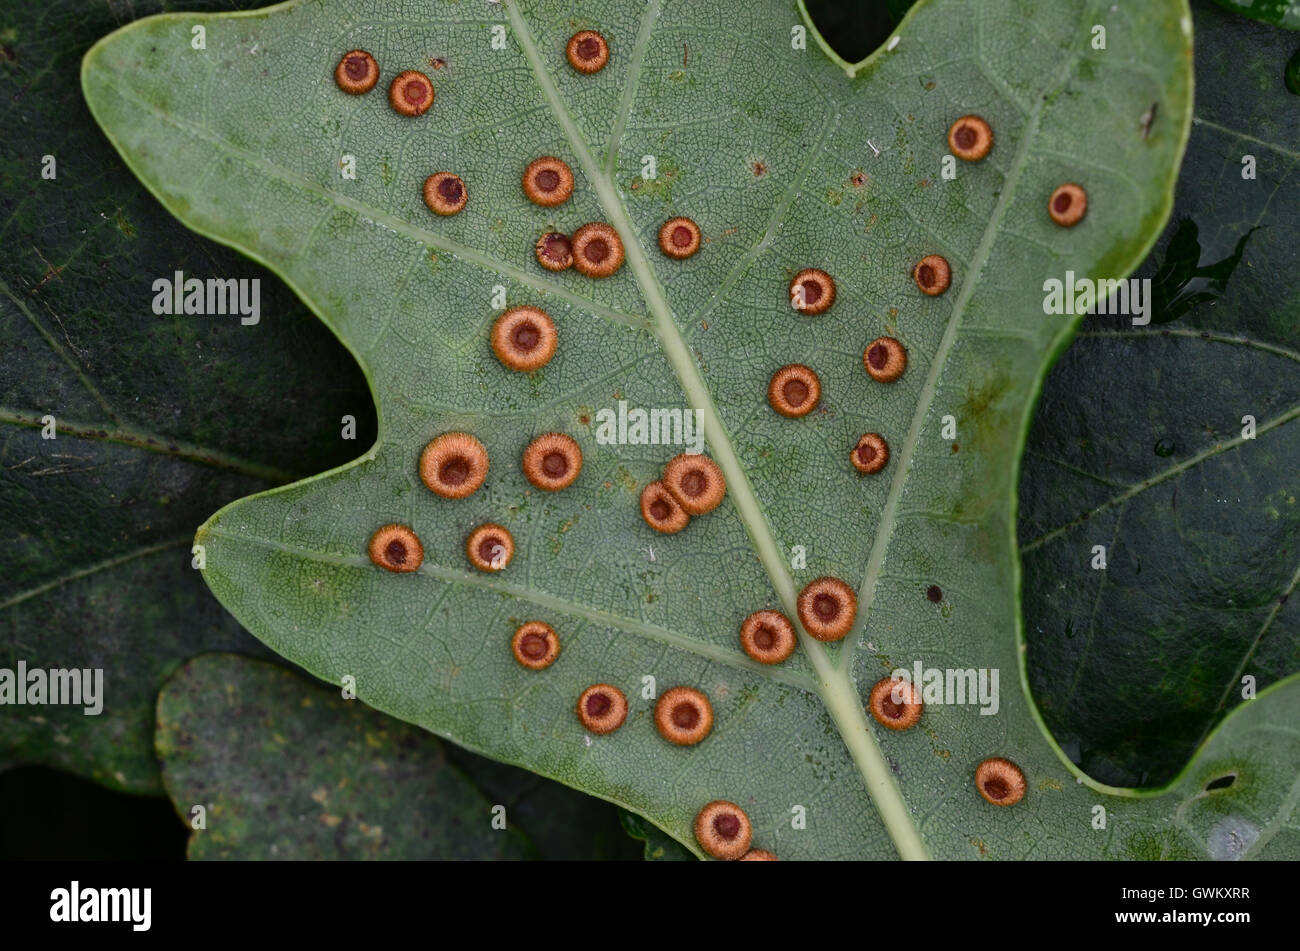 Silk button galls on the underside of pedunculate oak leaf caused by the gall wasp neuroterus numismalis. Stock Photo